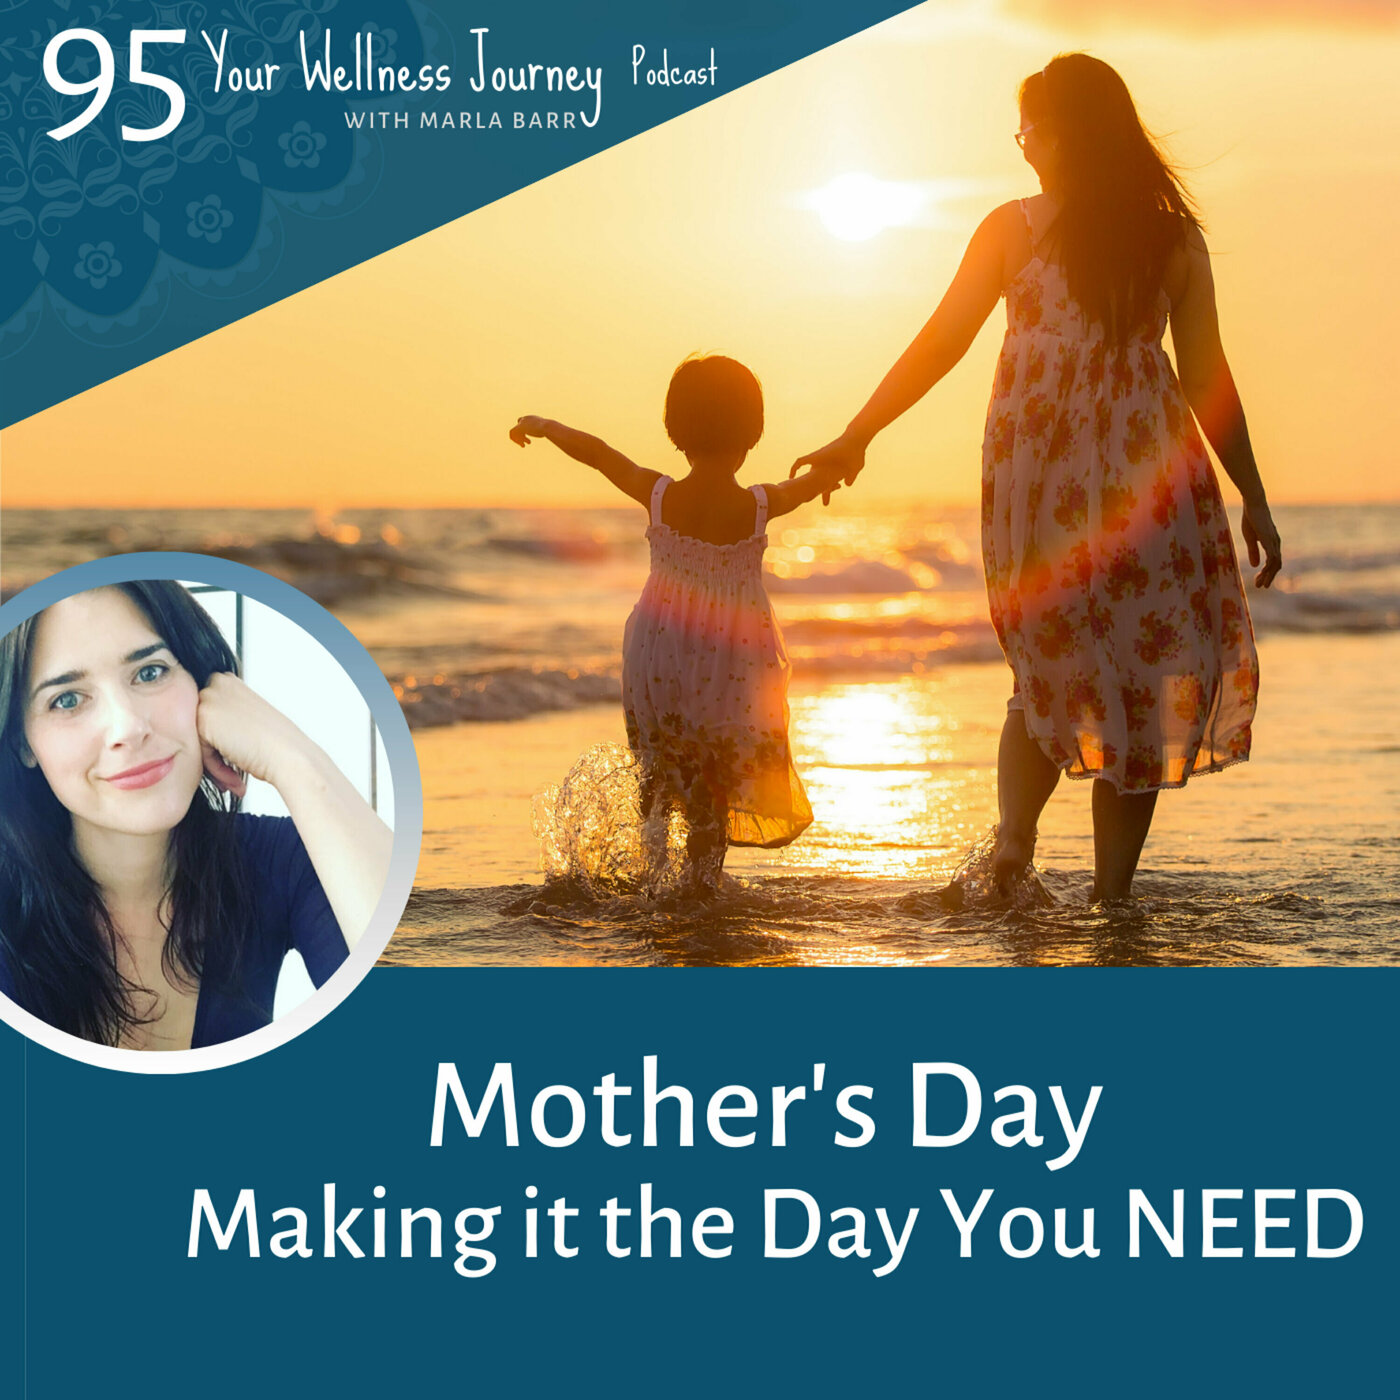 Mother's Day: Make It the Day You Need